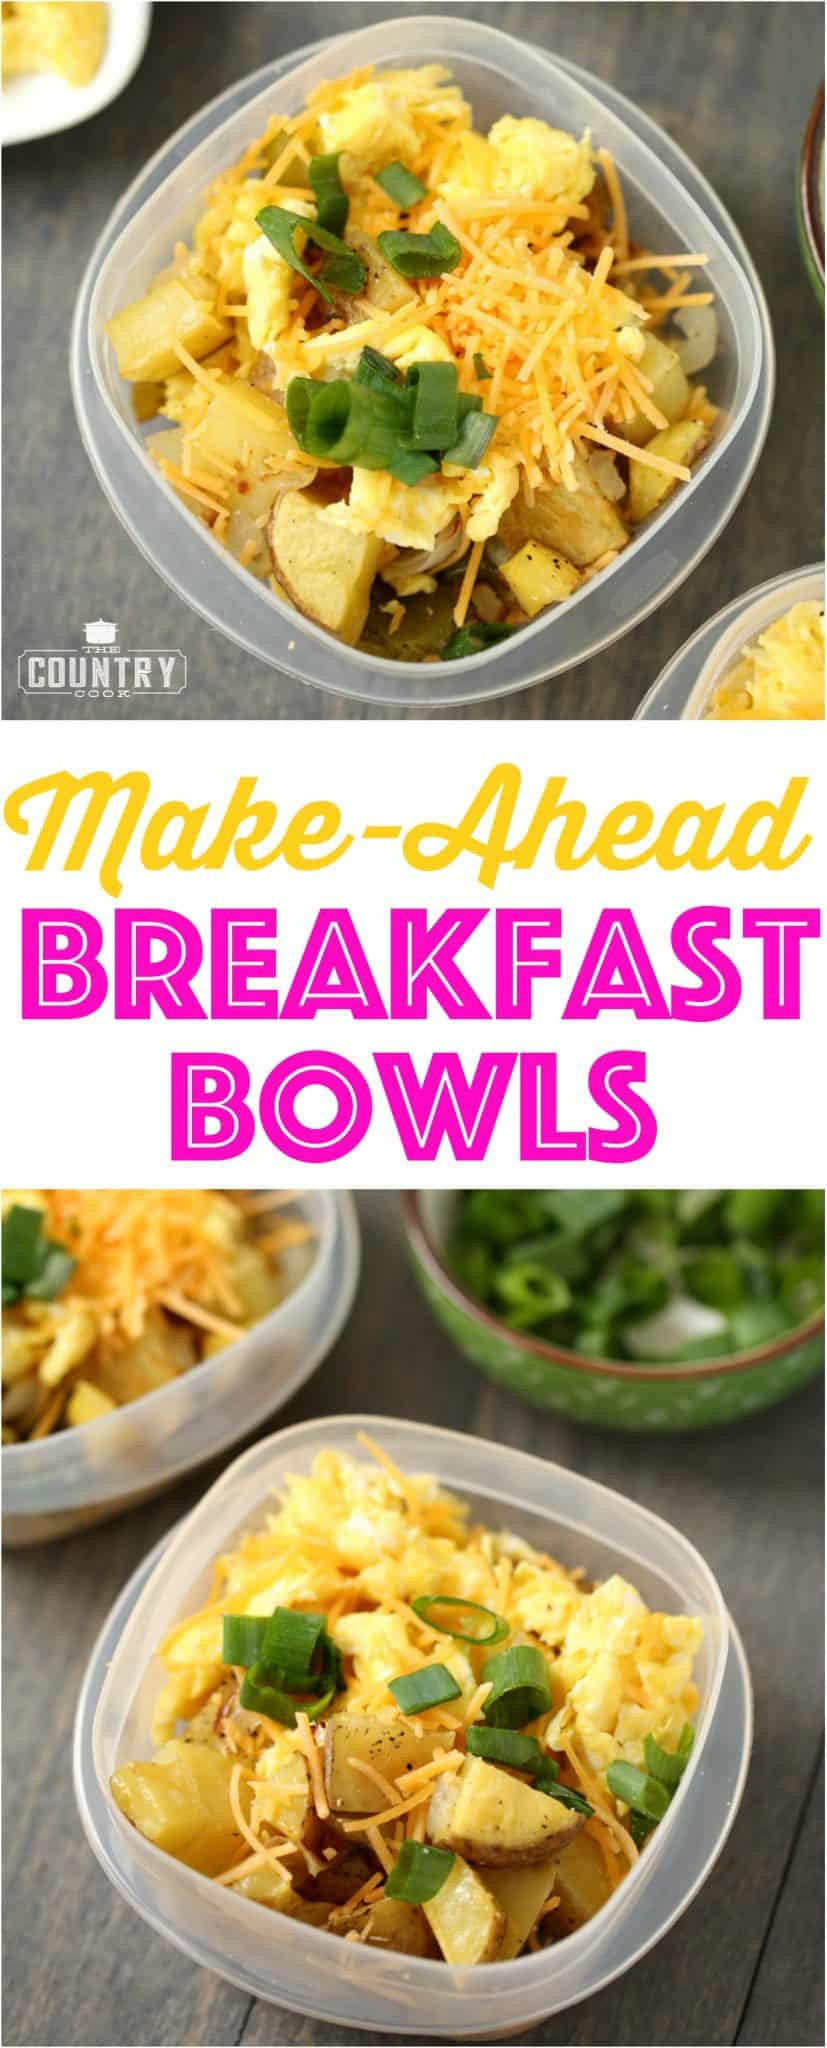 Frozen Breakfast Bowls
 Make Ahead Breakfast Bowls The Country Cook